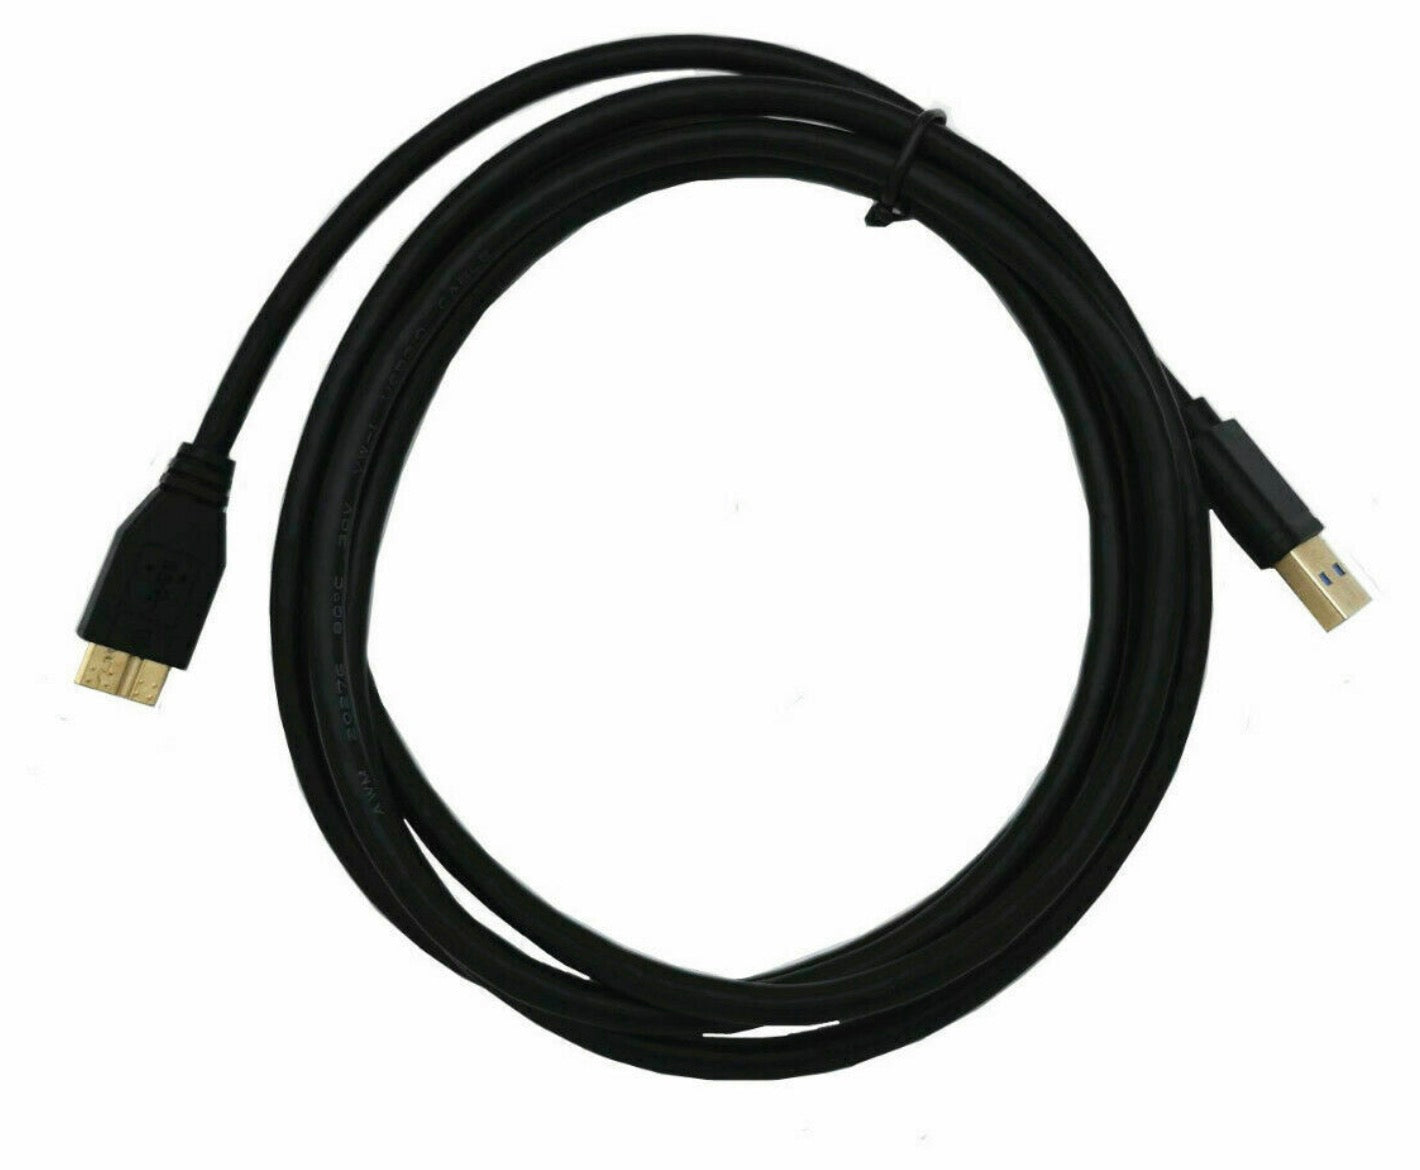 USB 3.0 Type A Male to USB 3.0 Micro-B Male Data Cable Gold Plated